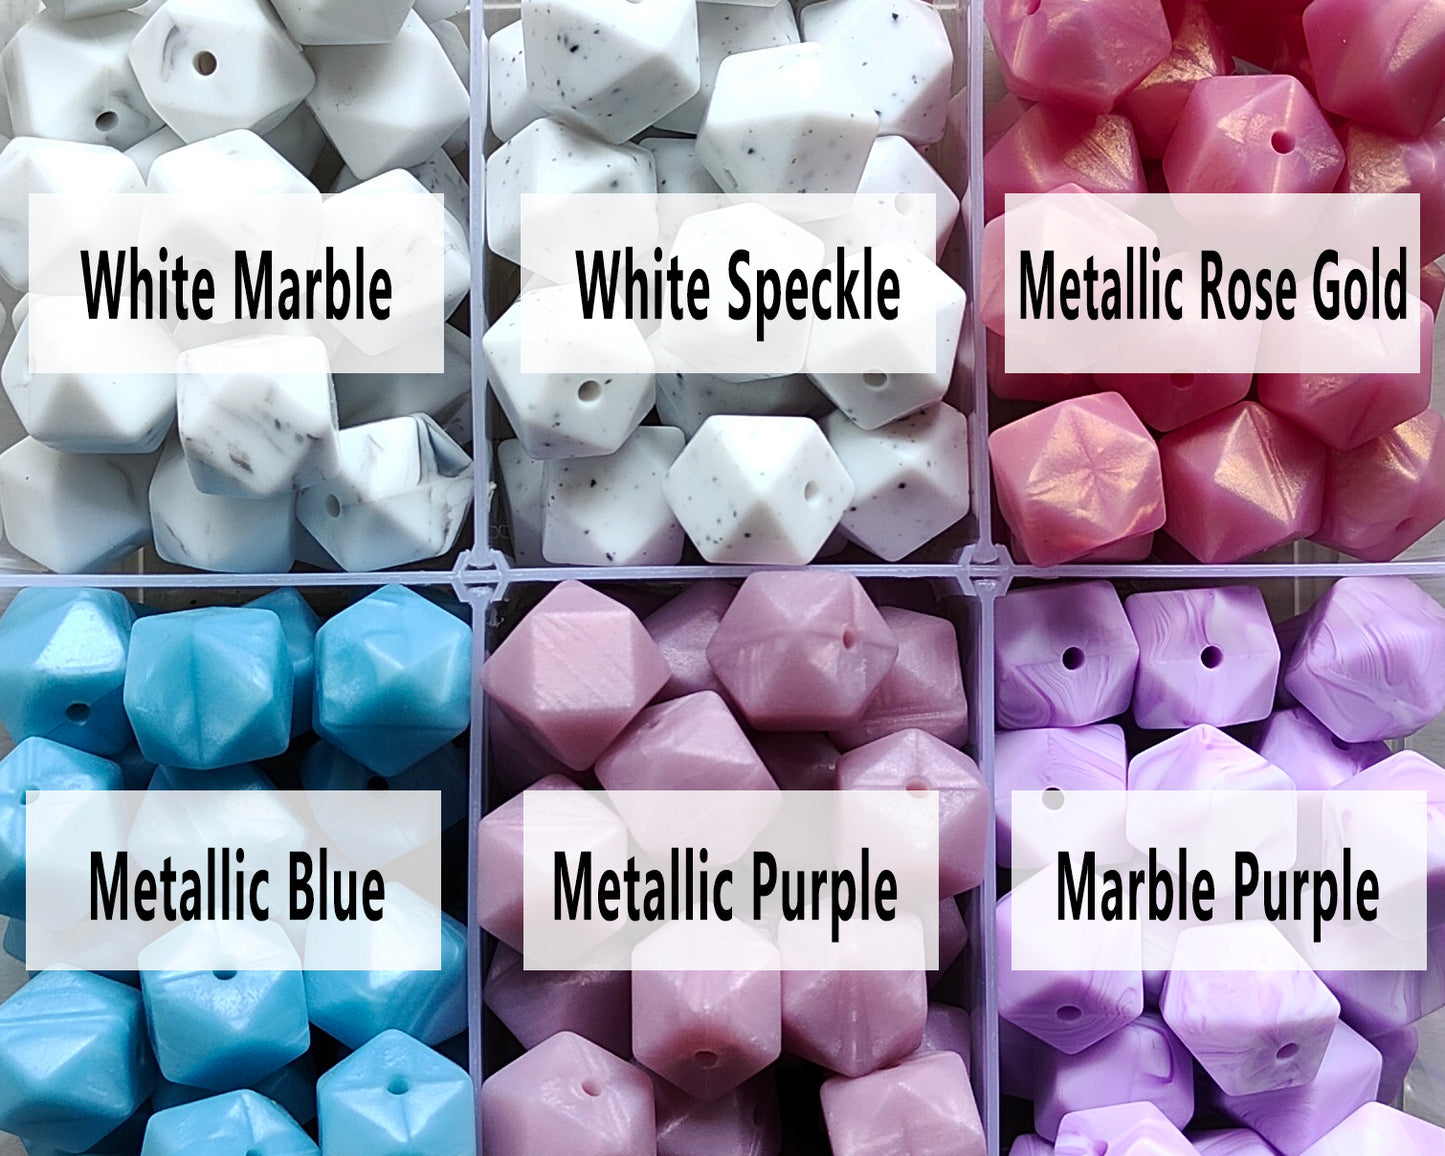 14/17mm Hexagon Silicone Beads #51 - #74